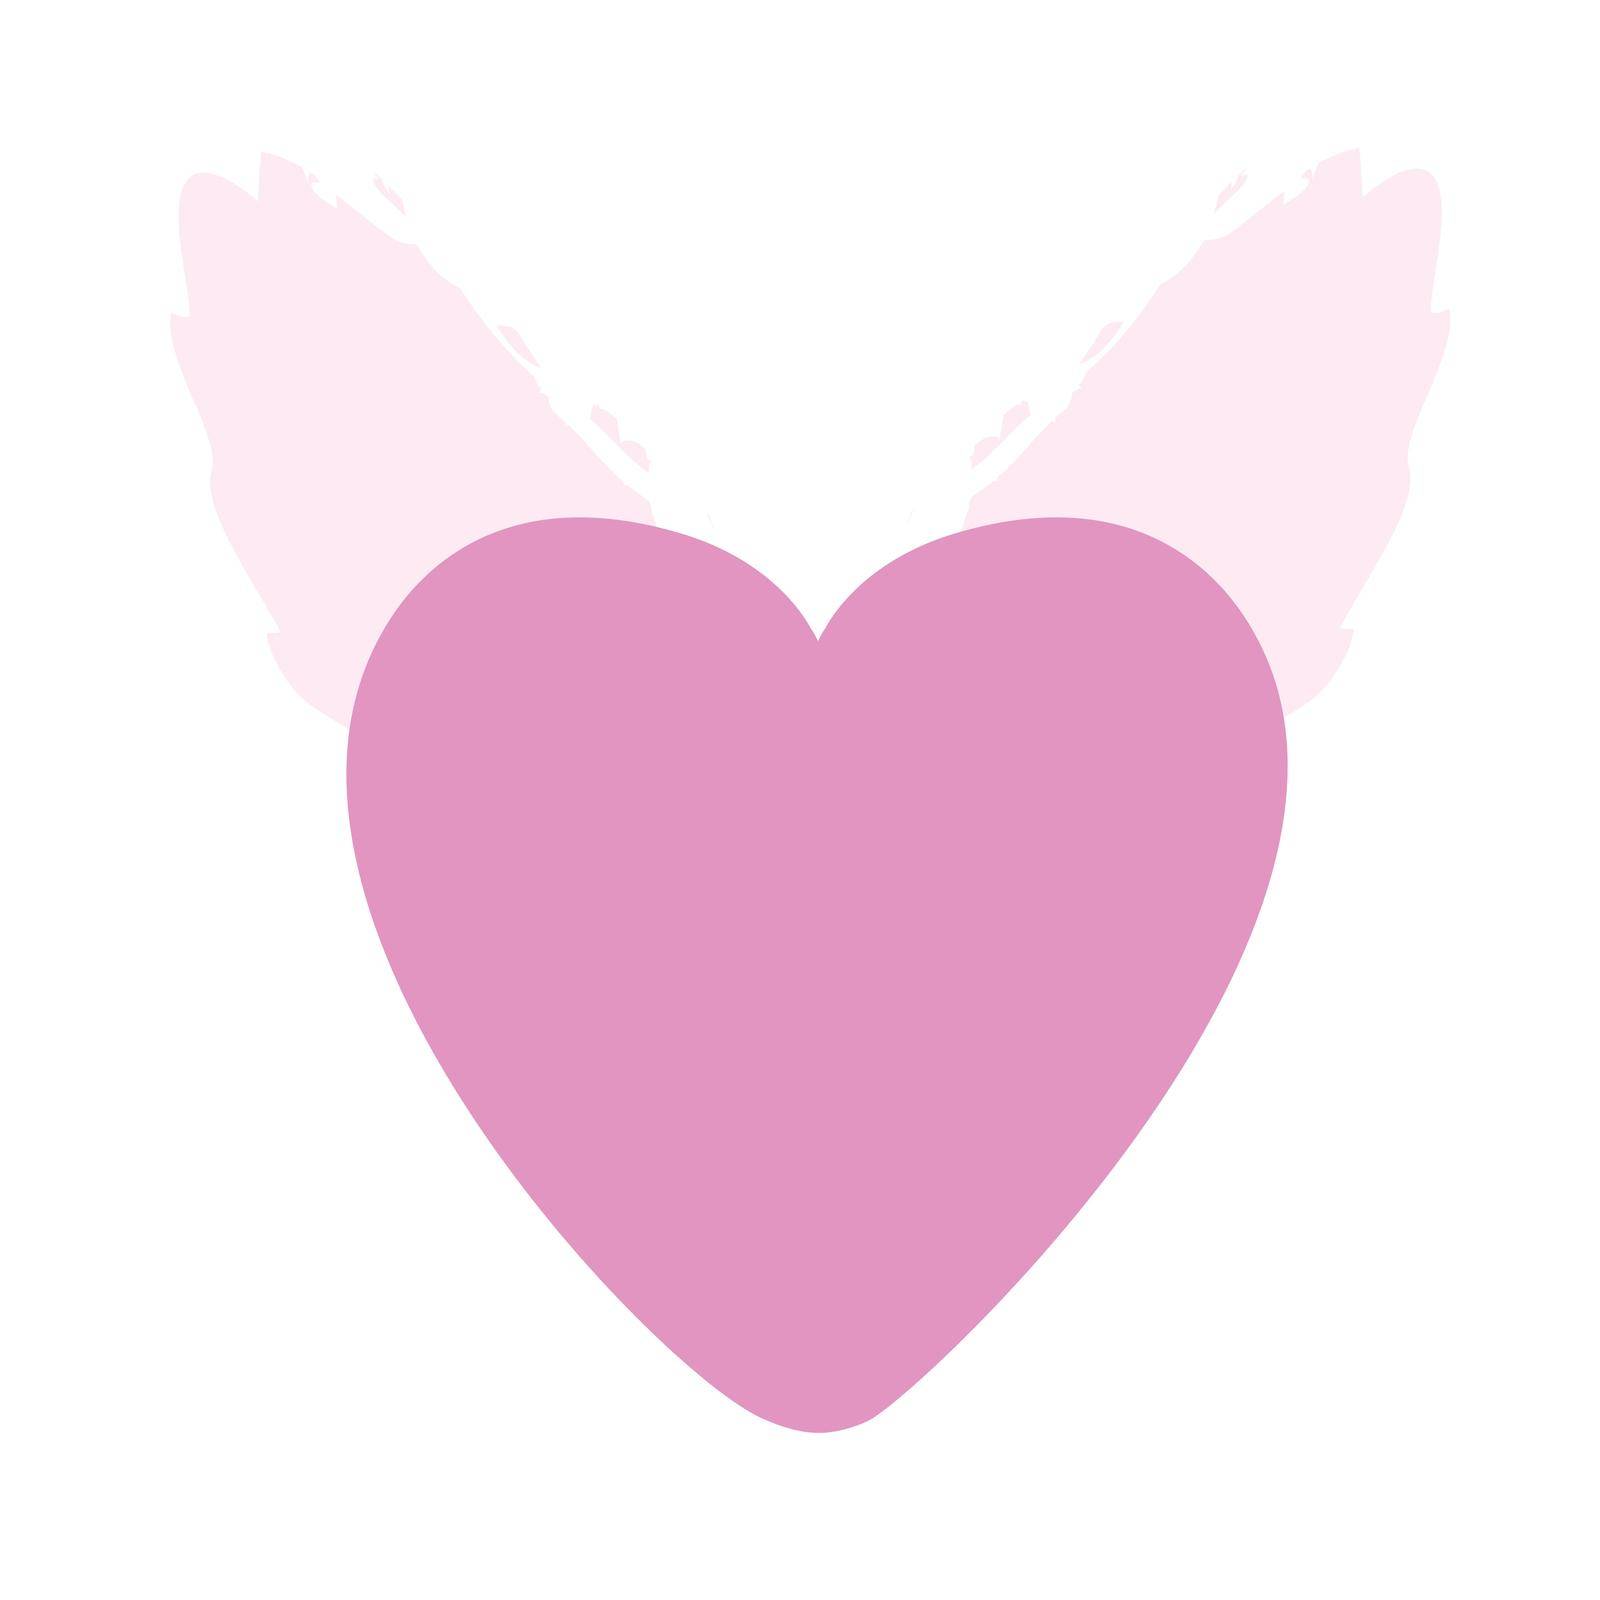 Pink heart with pink wings by vas_evg